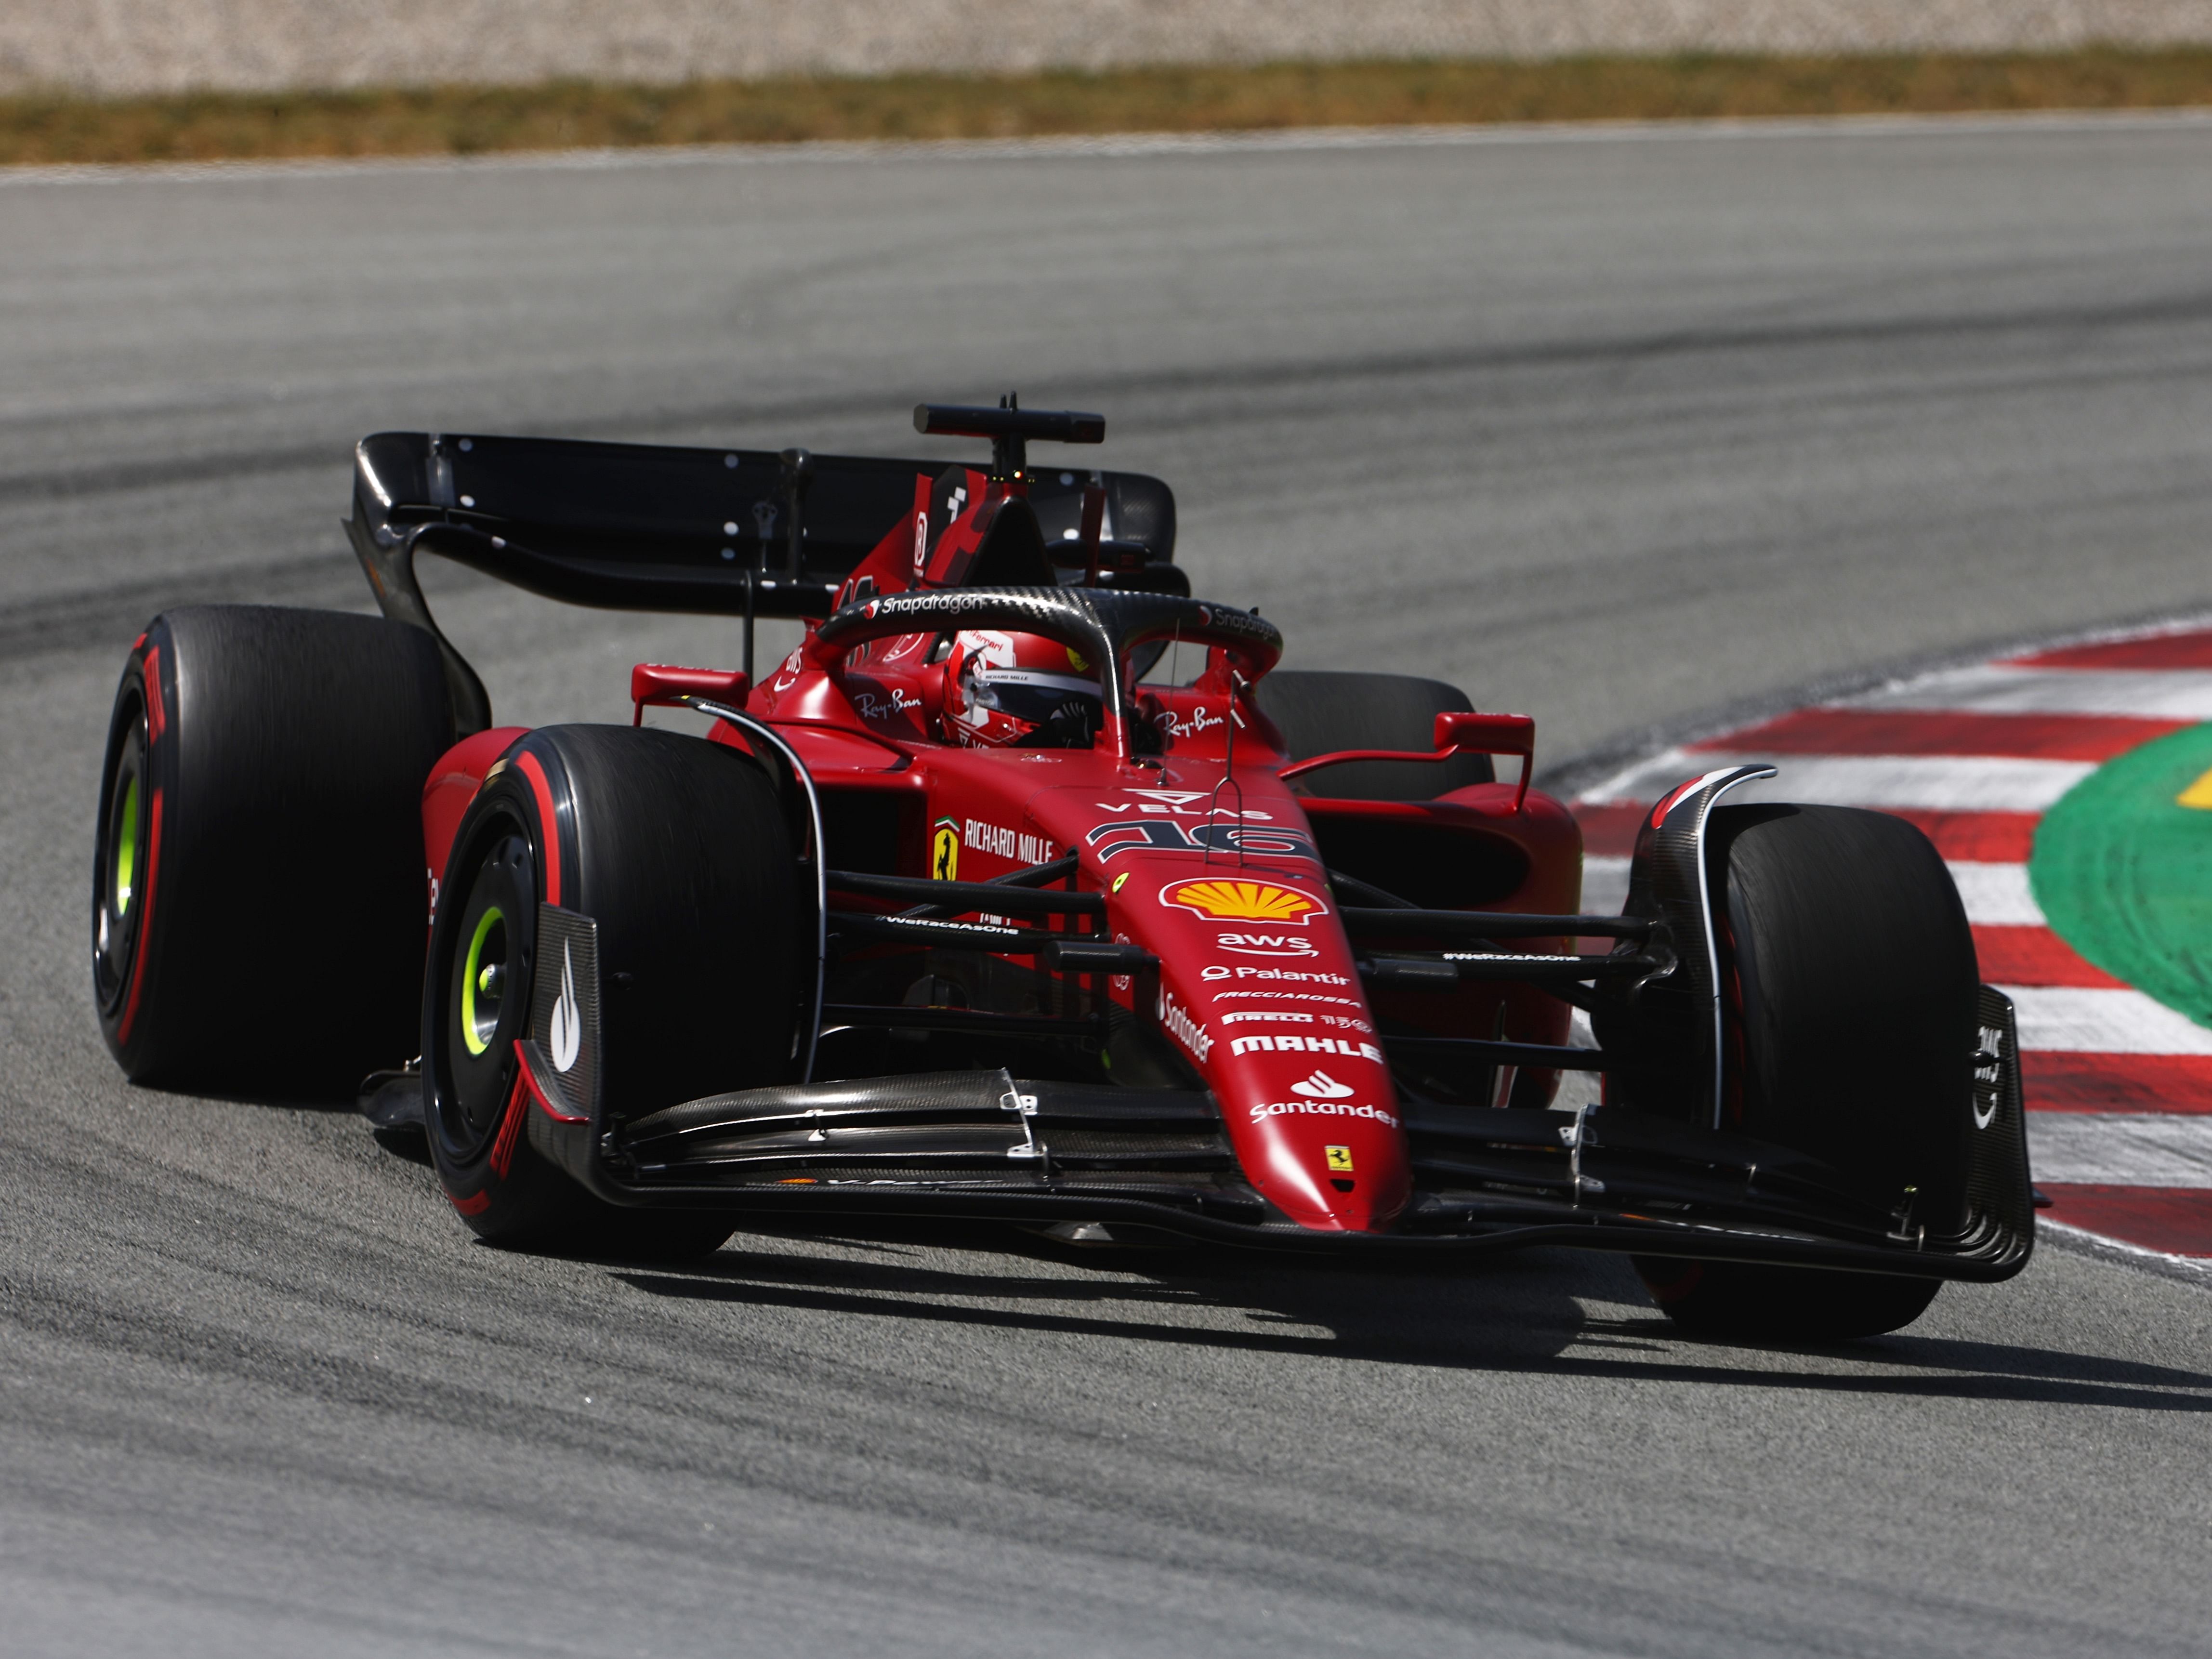 F1 Grand Prix of SpainCharles Leclerc (16) on track during the 2022 F1 Spanish Grand Prix. (Photo by Lars Baron/Getty Images)